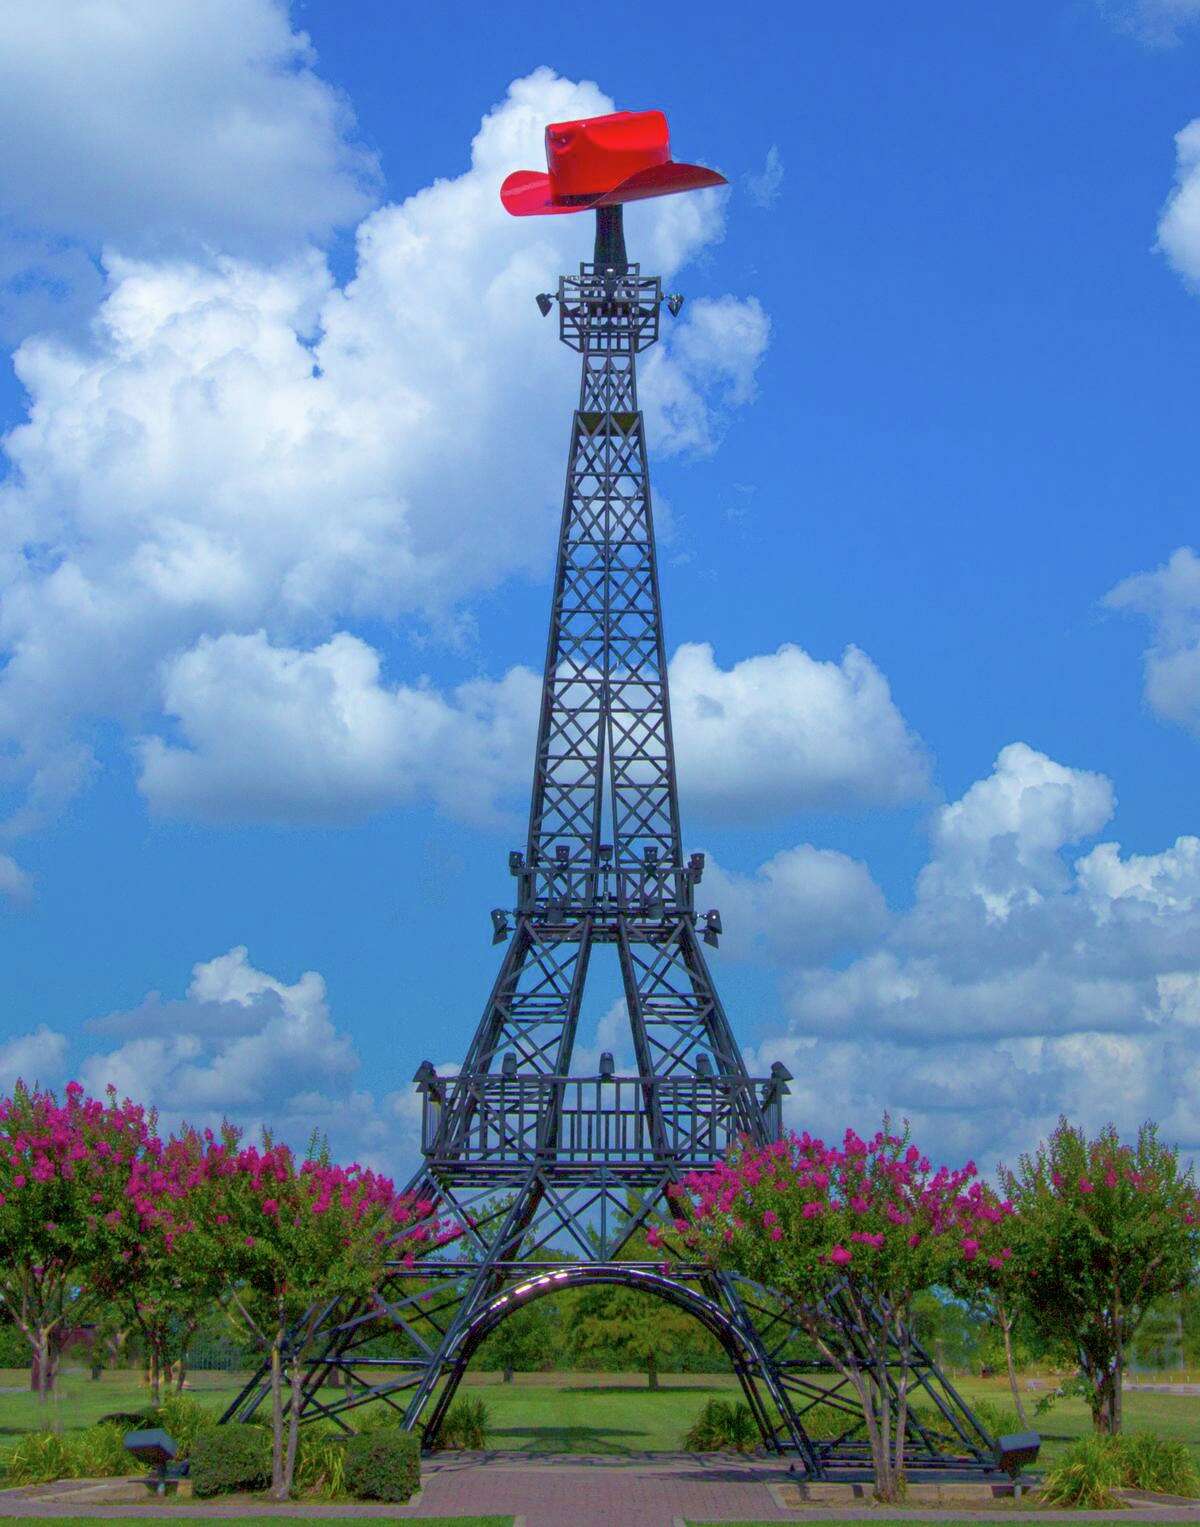 The 65-foot-tall Texas Eiffel Tower may be a bit smaller than the original, but it attracts a lot of visitors to the Northeast Texas town of Paris.